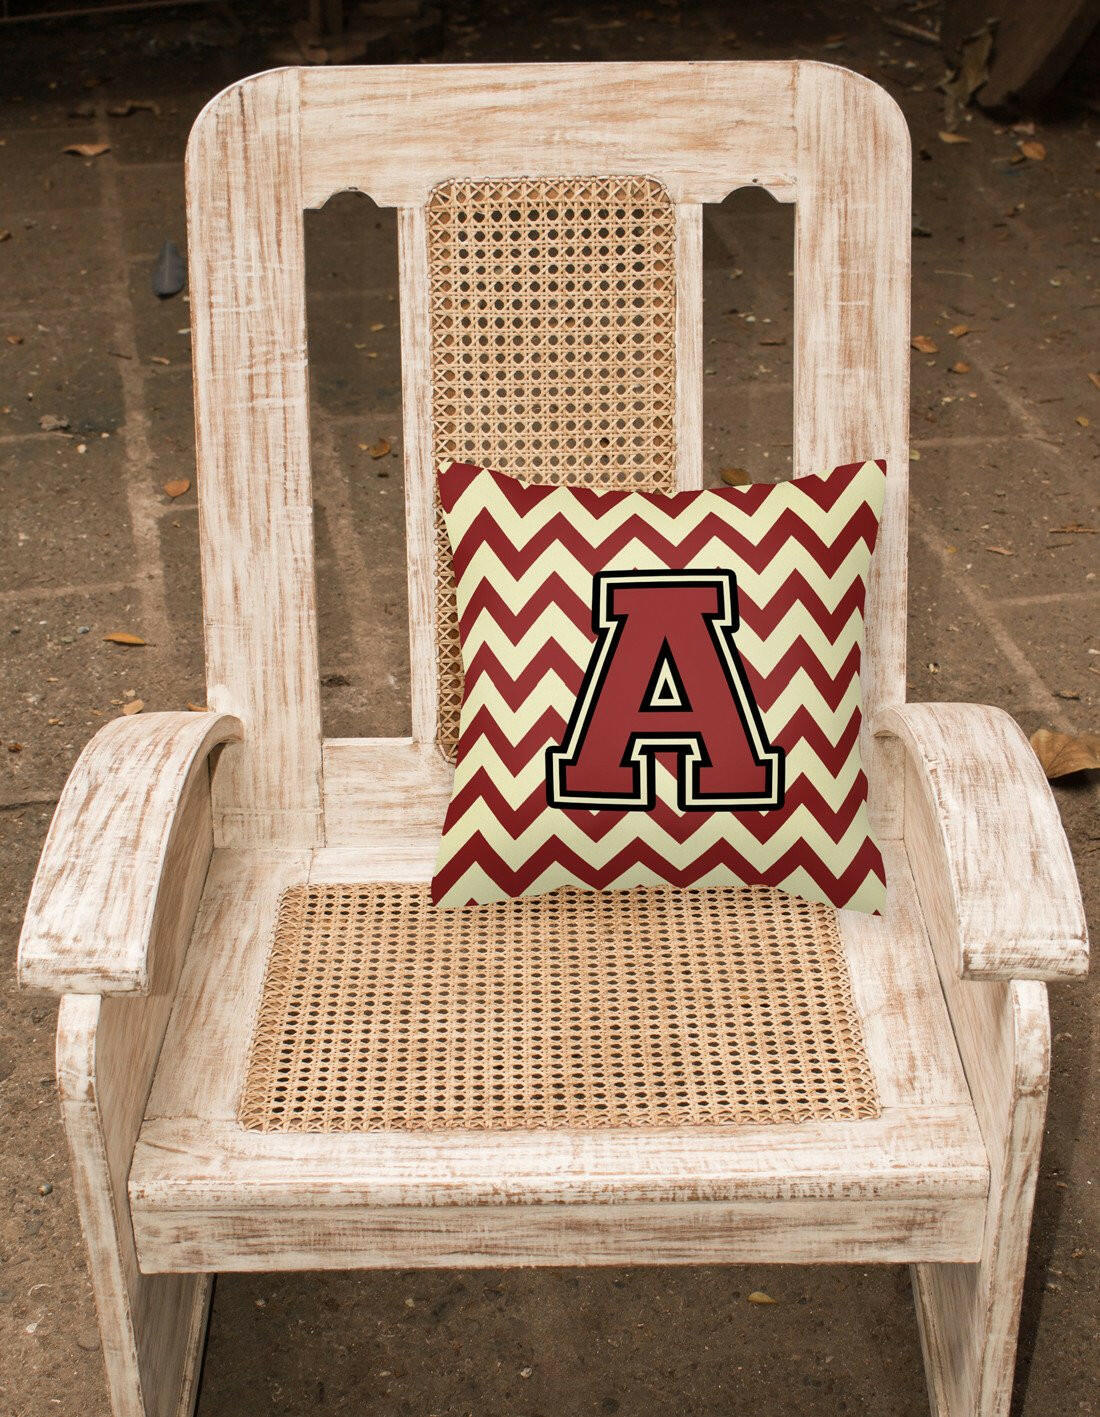 Letter A Chevron Maroon and Gold Fabric Decorative Pillow CJ1061-APW1414 by Caroline's Treasures